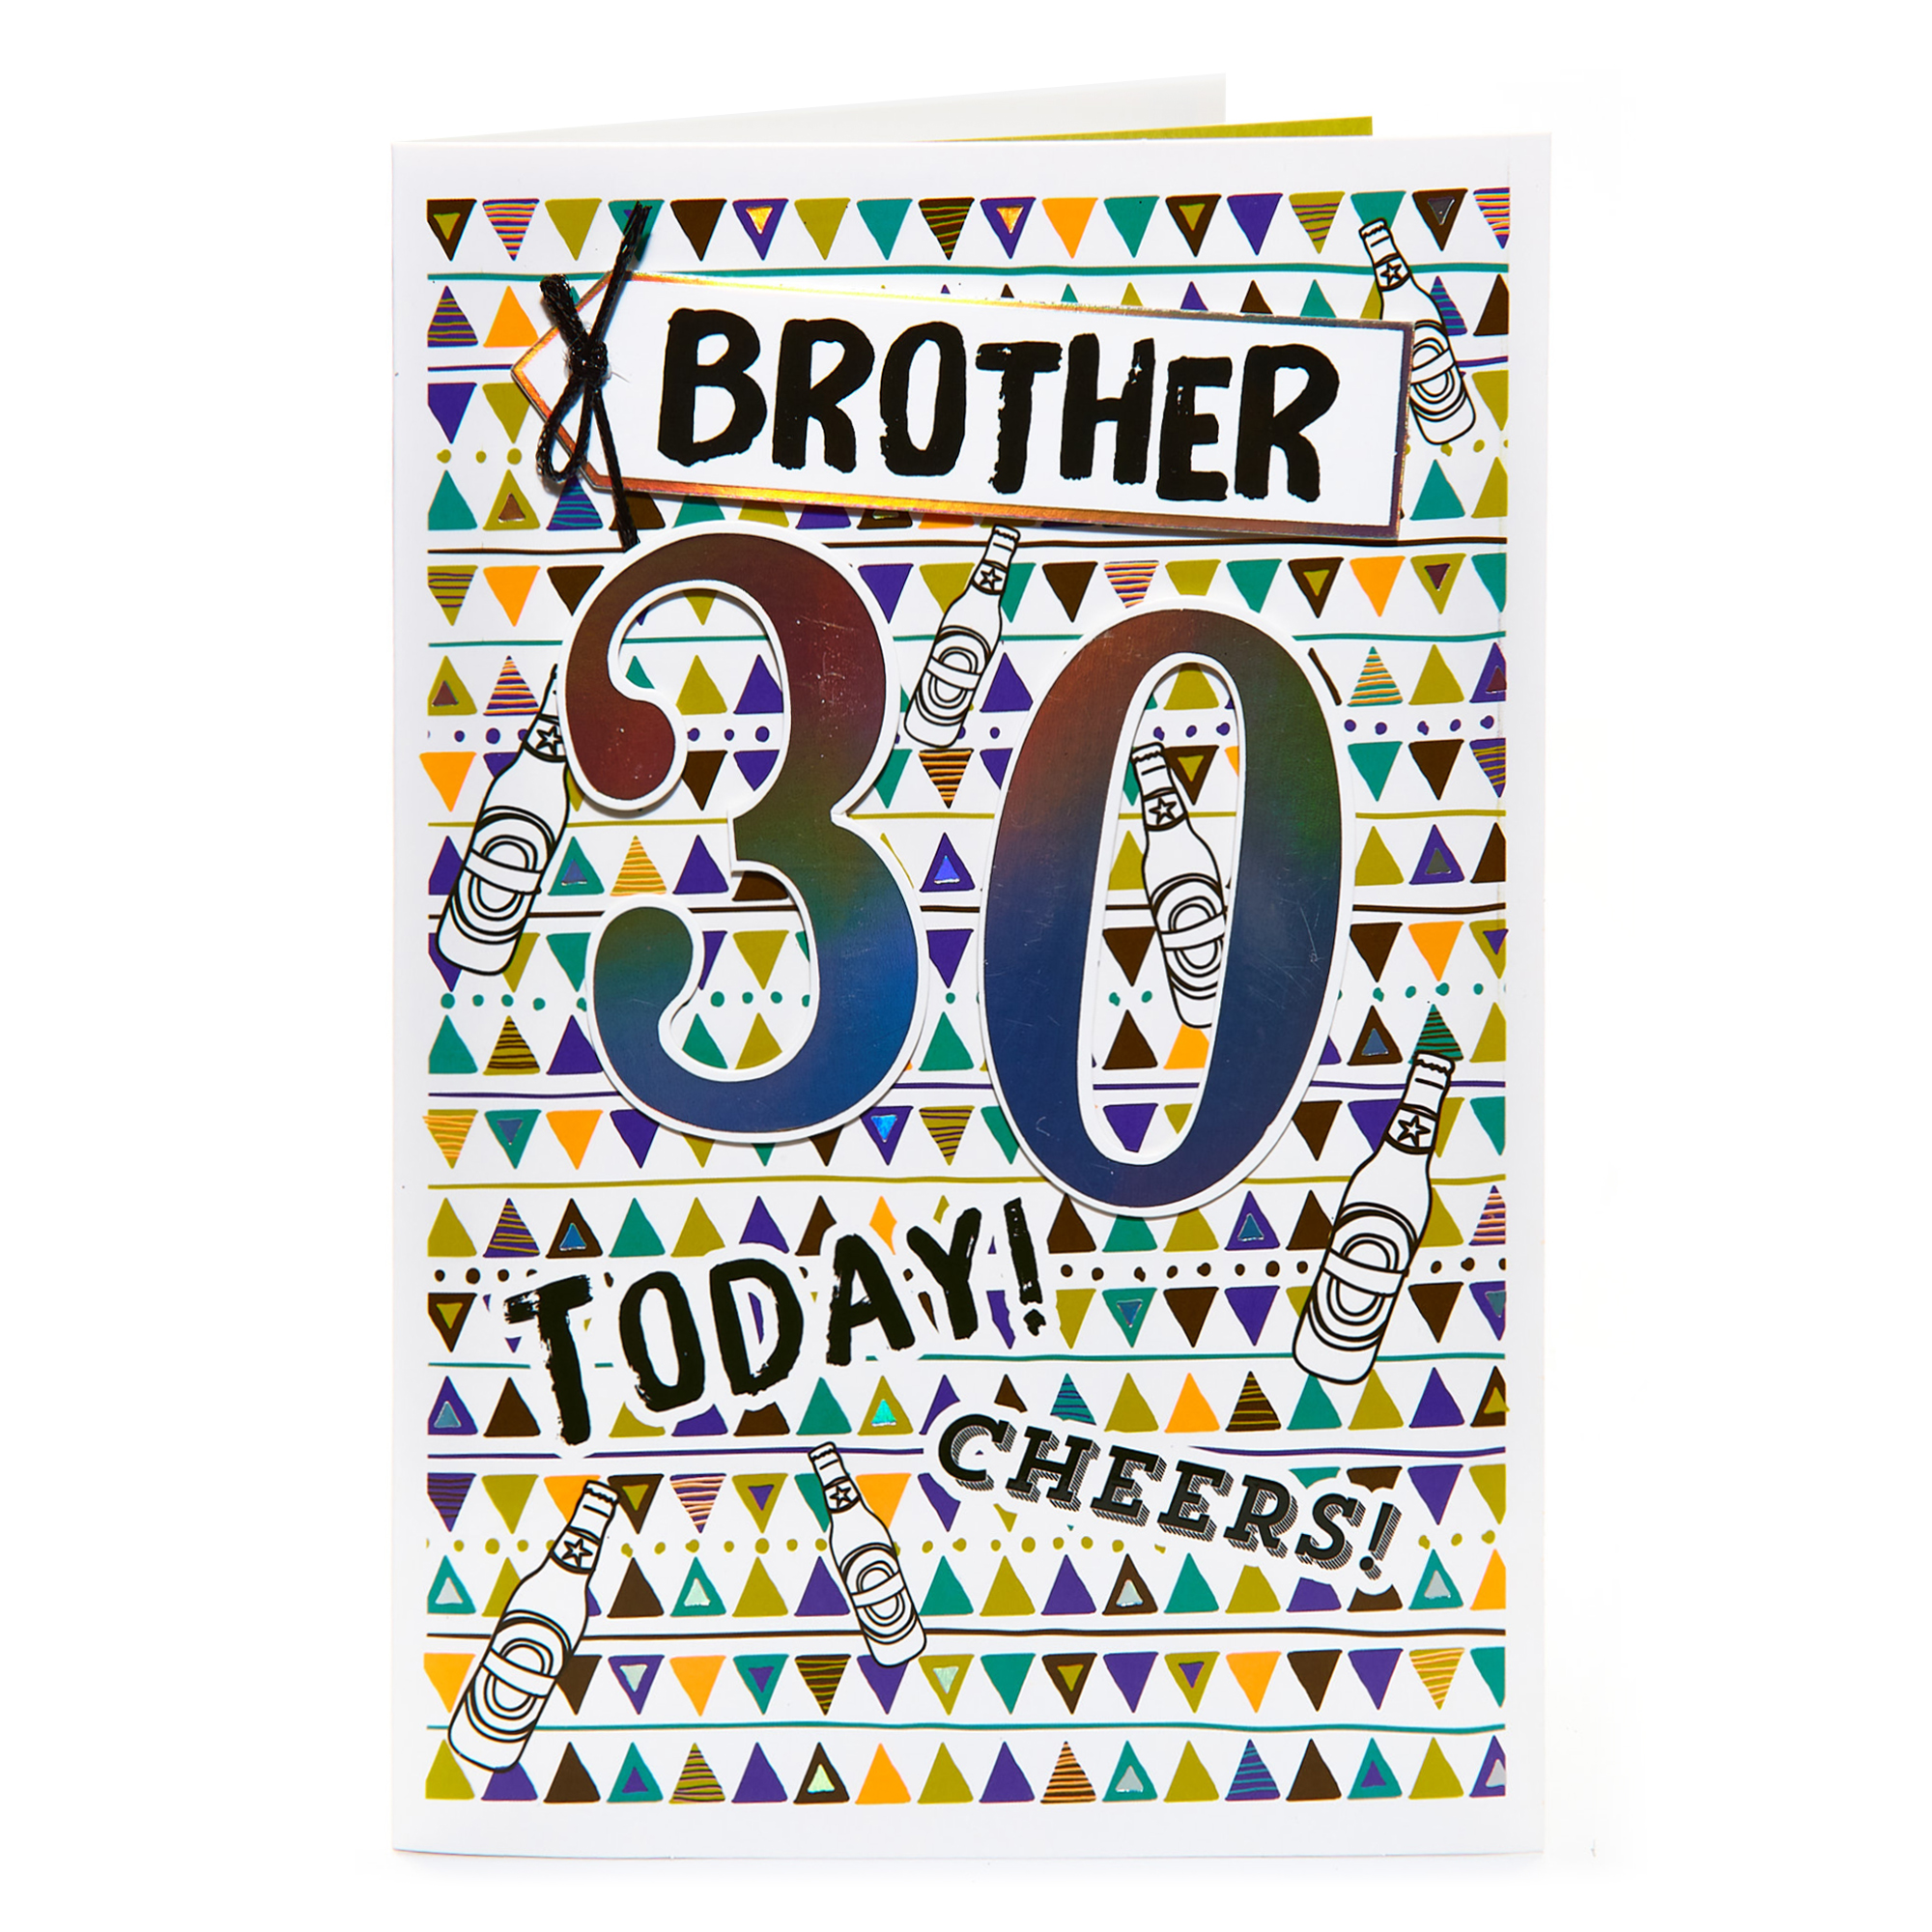 30th Birthday Card - Brother, Cheers!